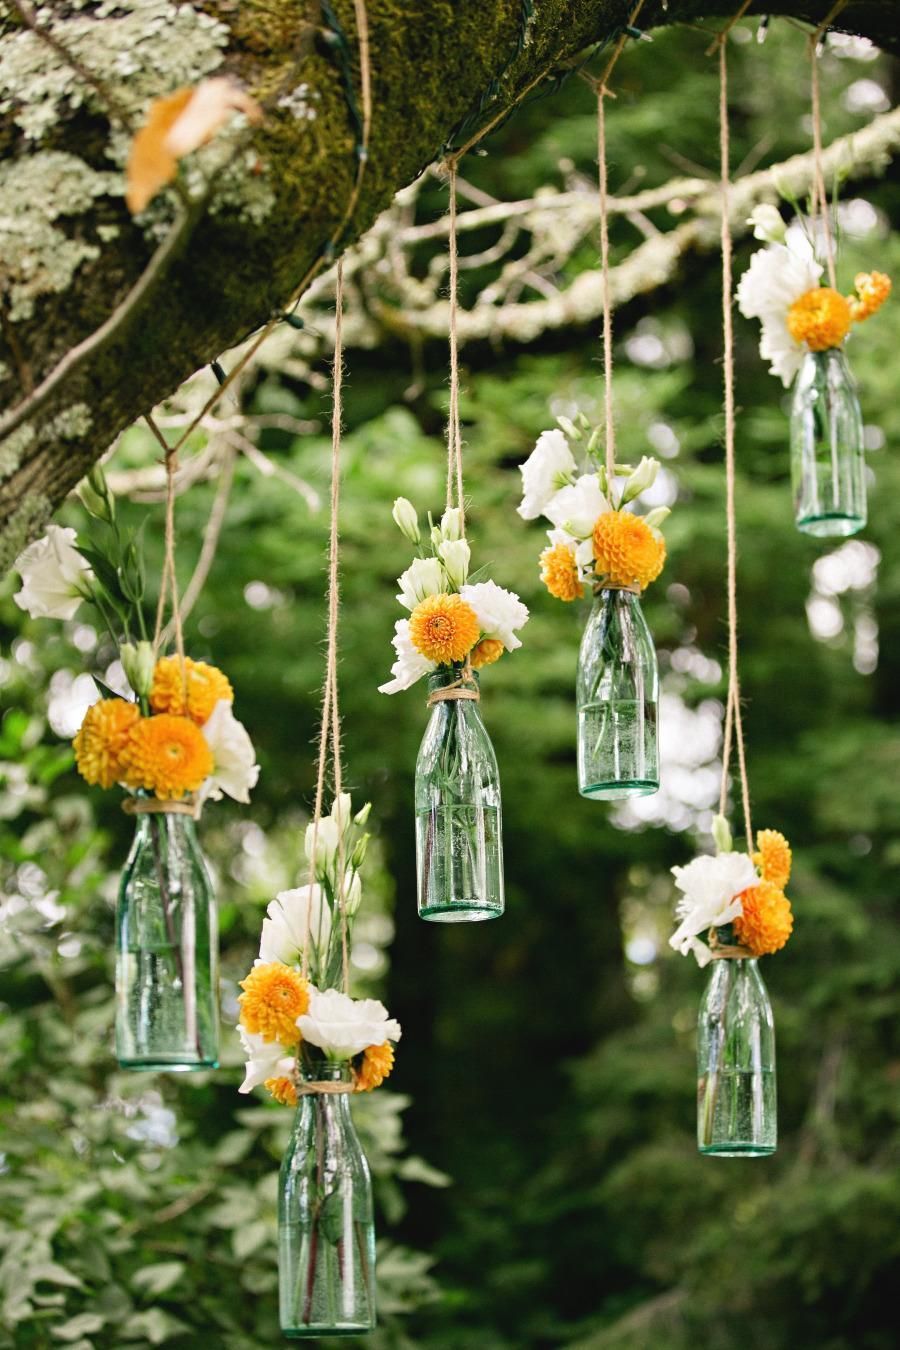 hanging flowers for outdoor wedding ceremony / reception decor. Suspend clear soda bottles from tree branc